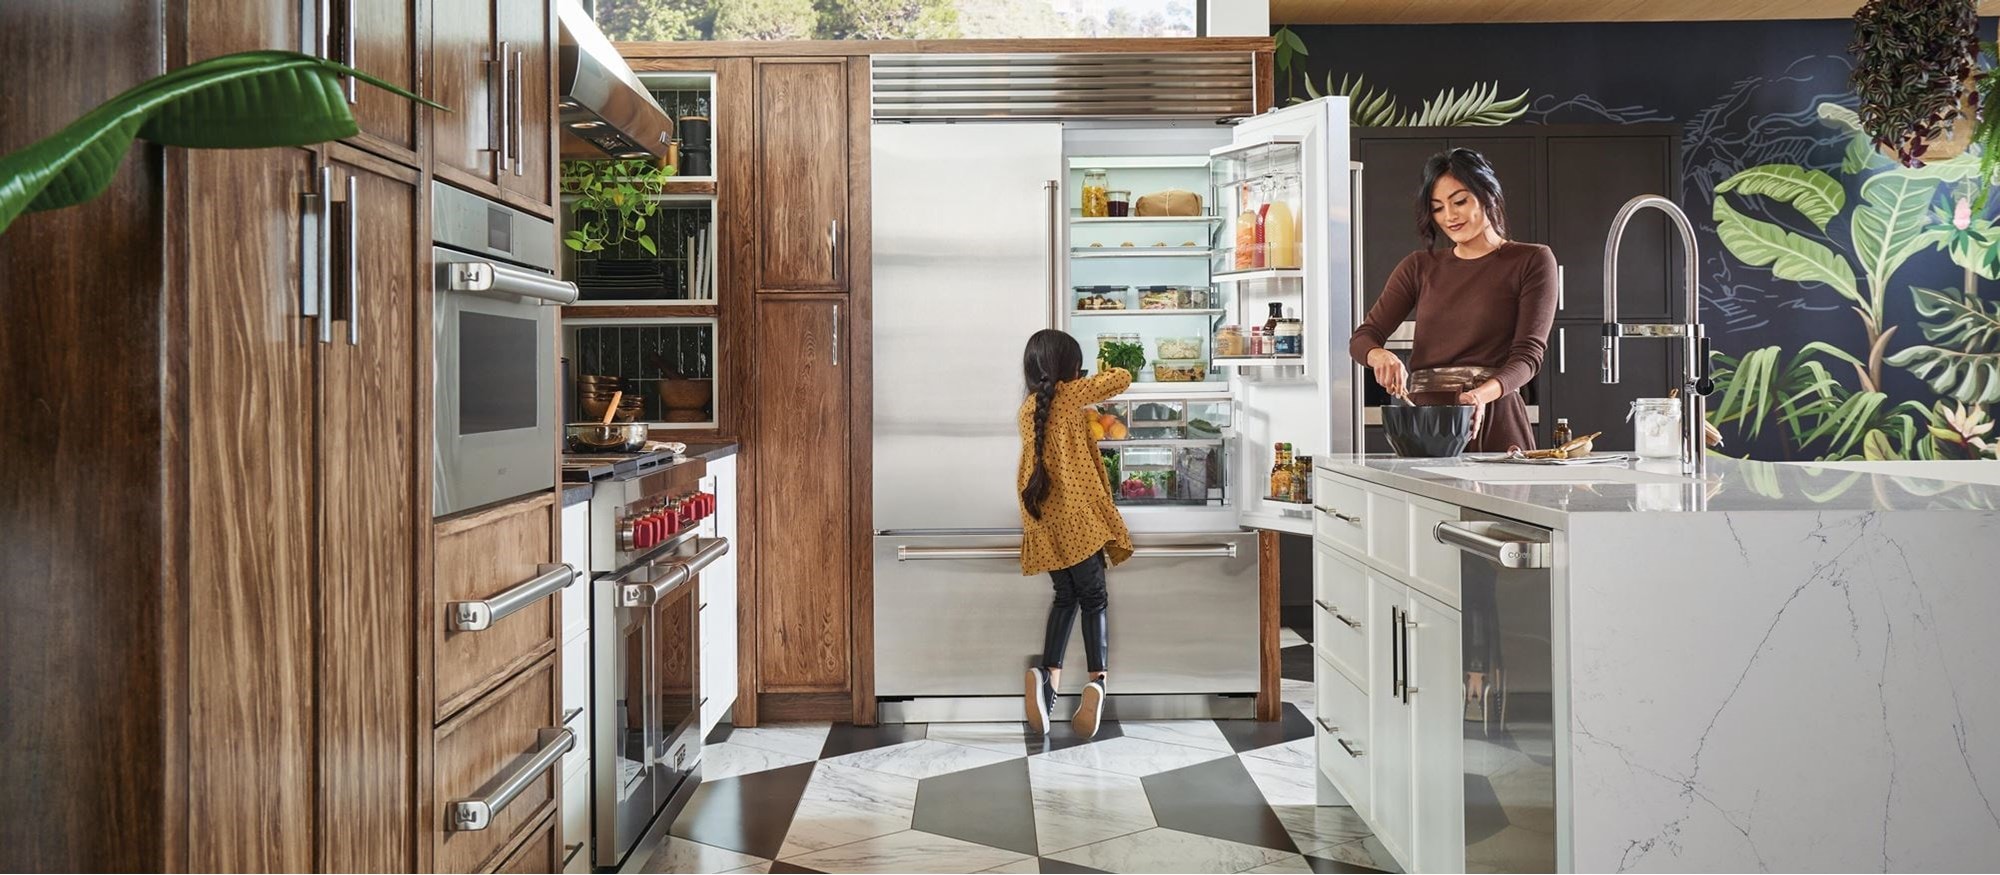 Mother and daughter in a kitchen equipped with a Sub-Zero fridge